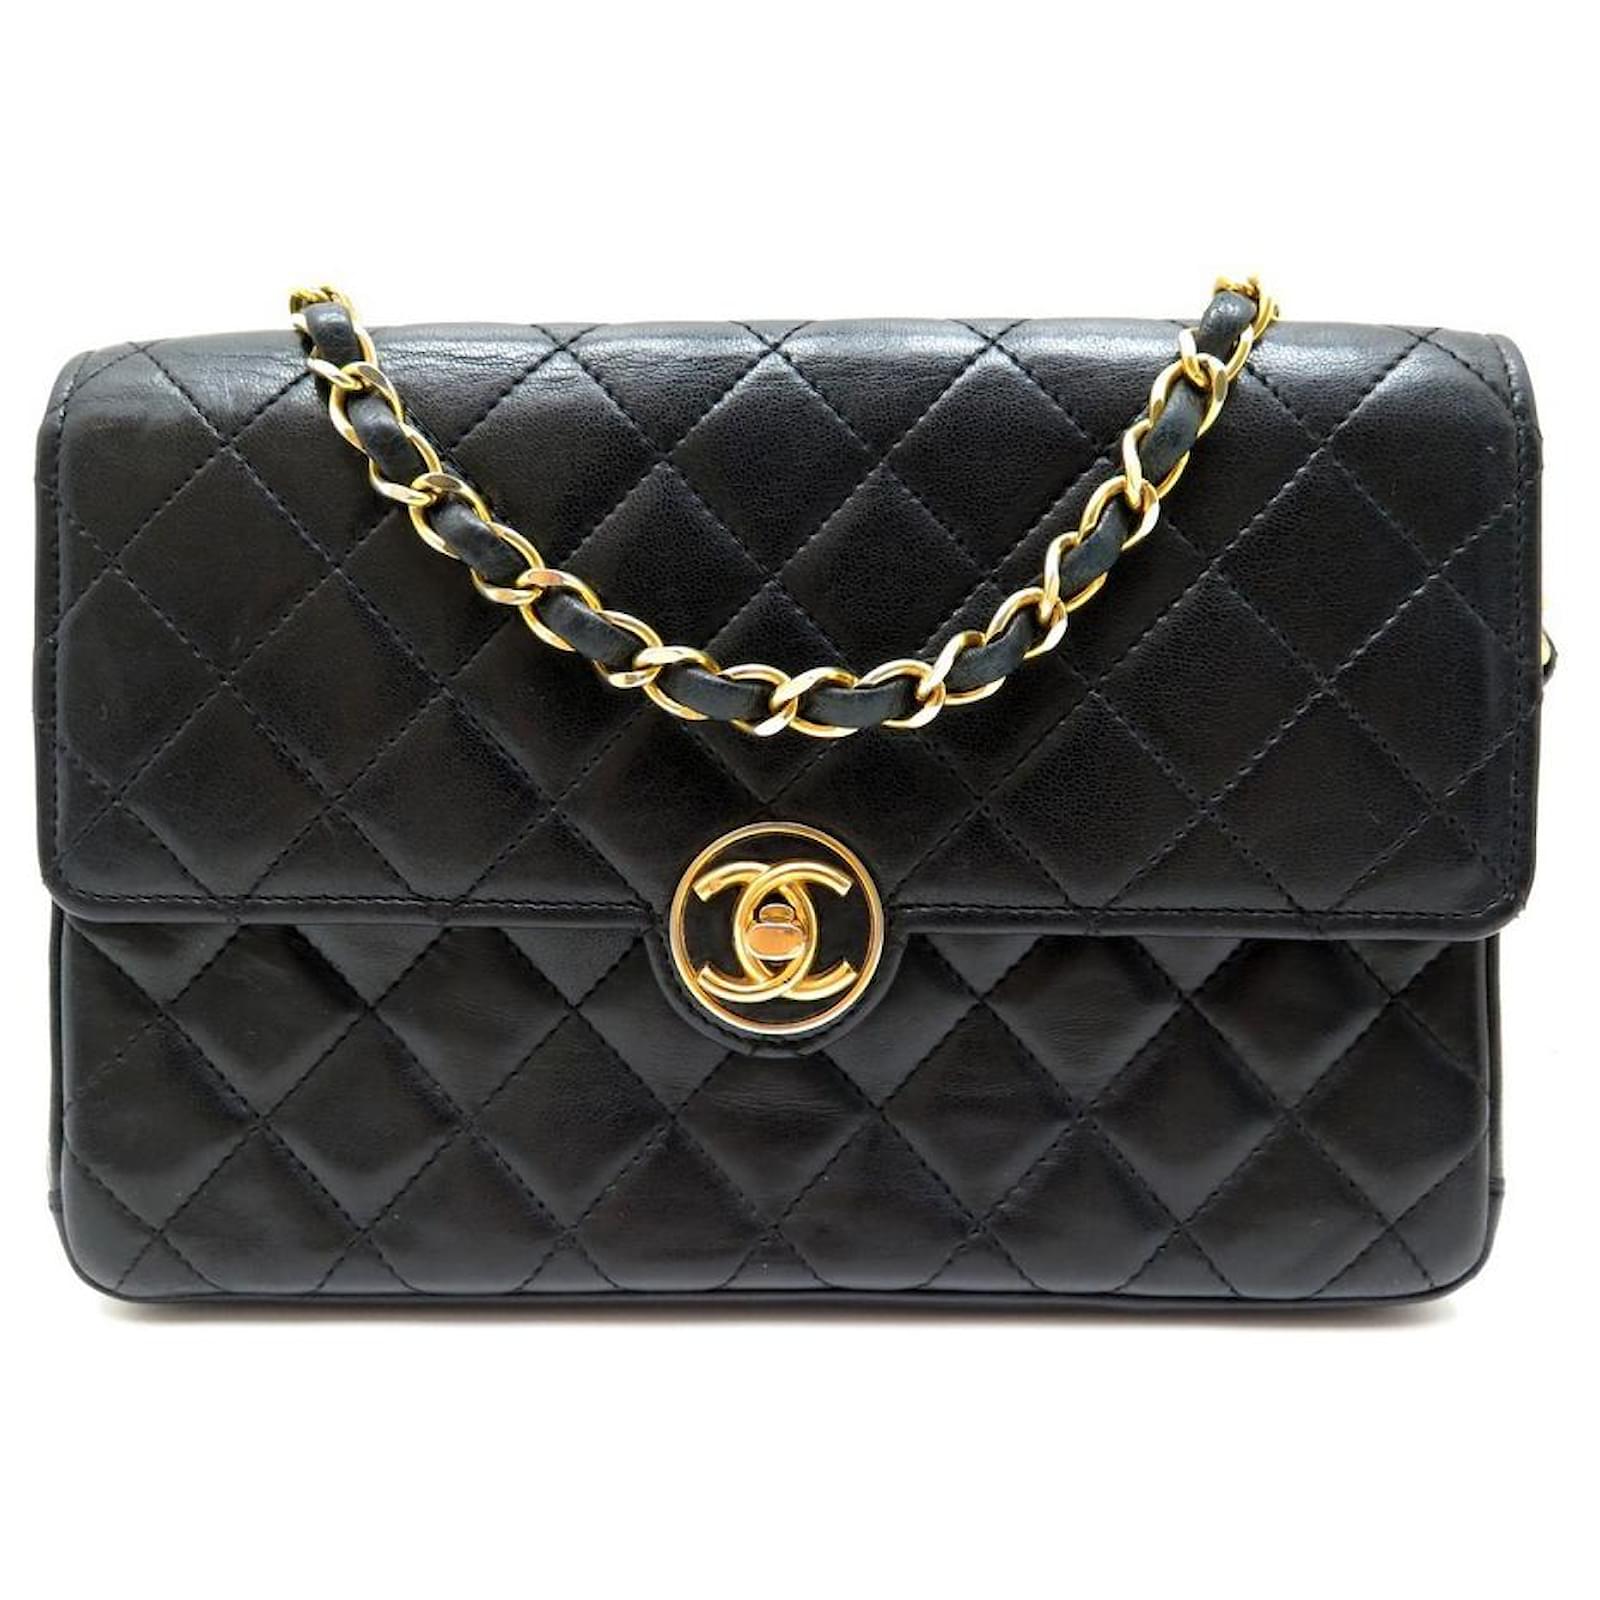 Chanel Vintage Black Medium Trapezoid Quilted Flap Bag 24k GHW